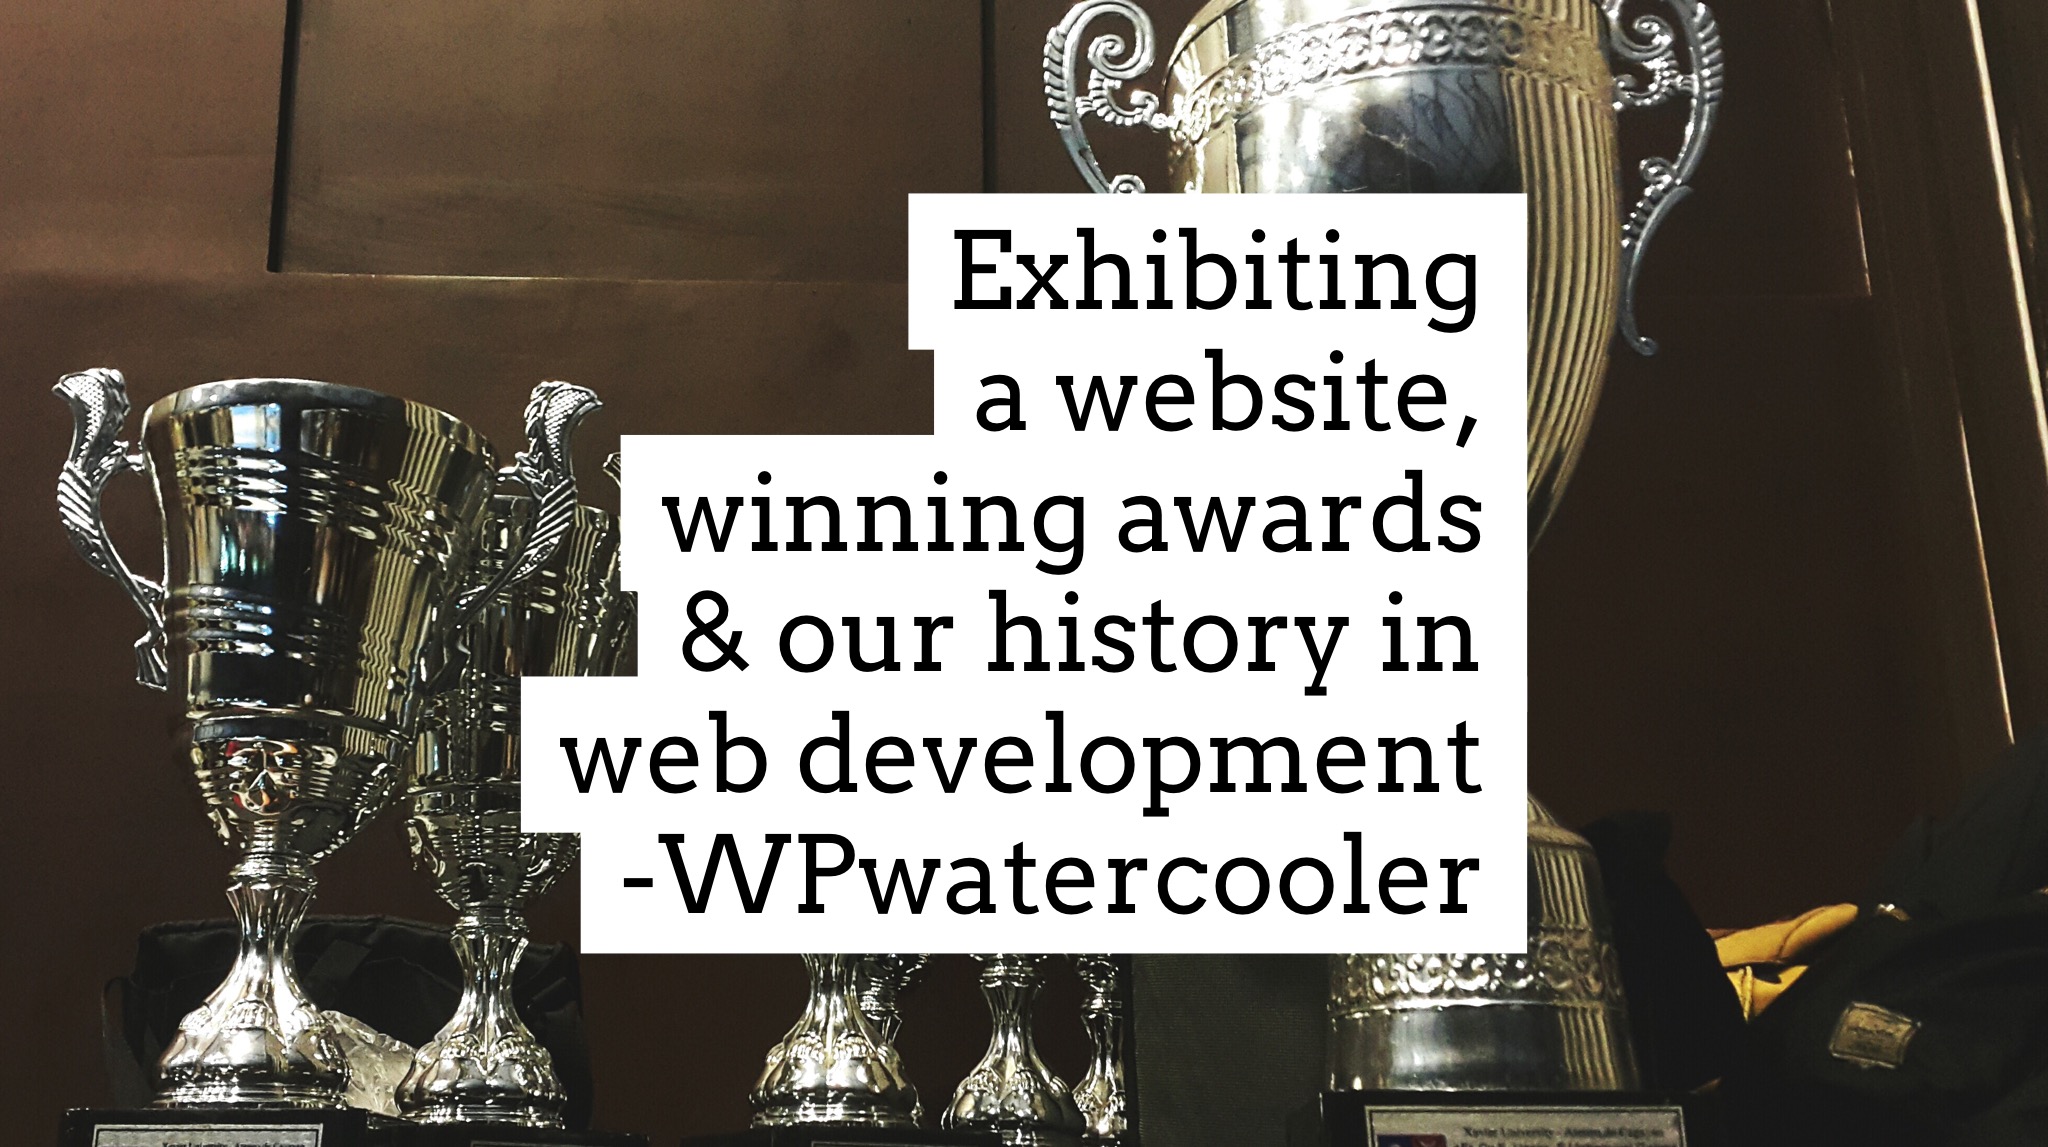 EP290 – Exhibiting a website, winning awards& our history in web development – WPwatercooler